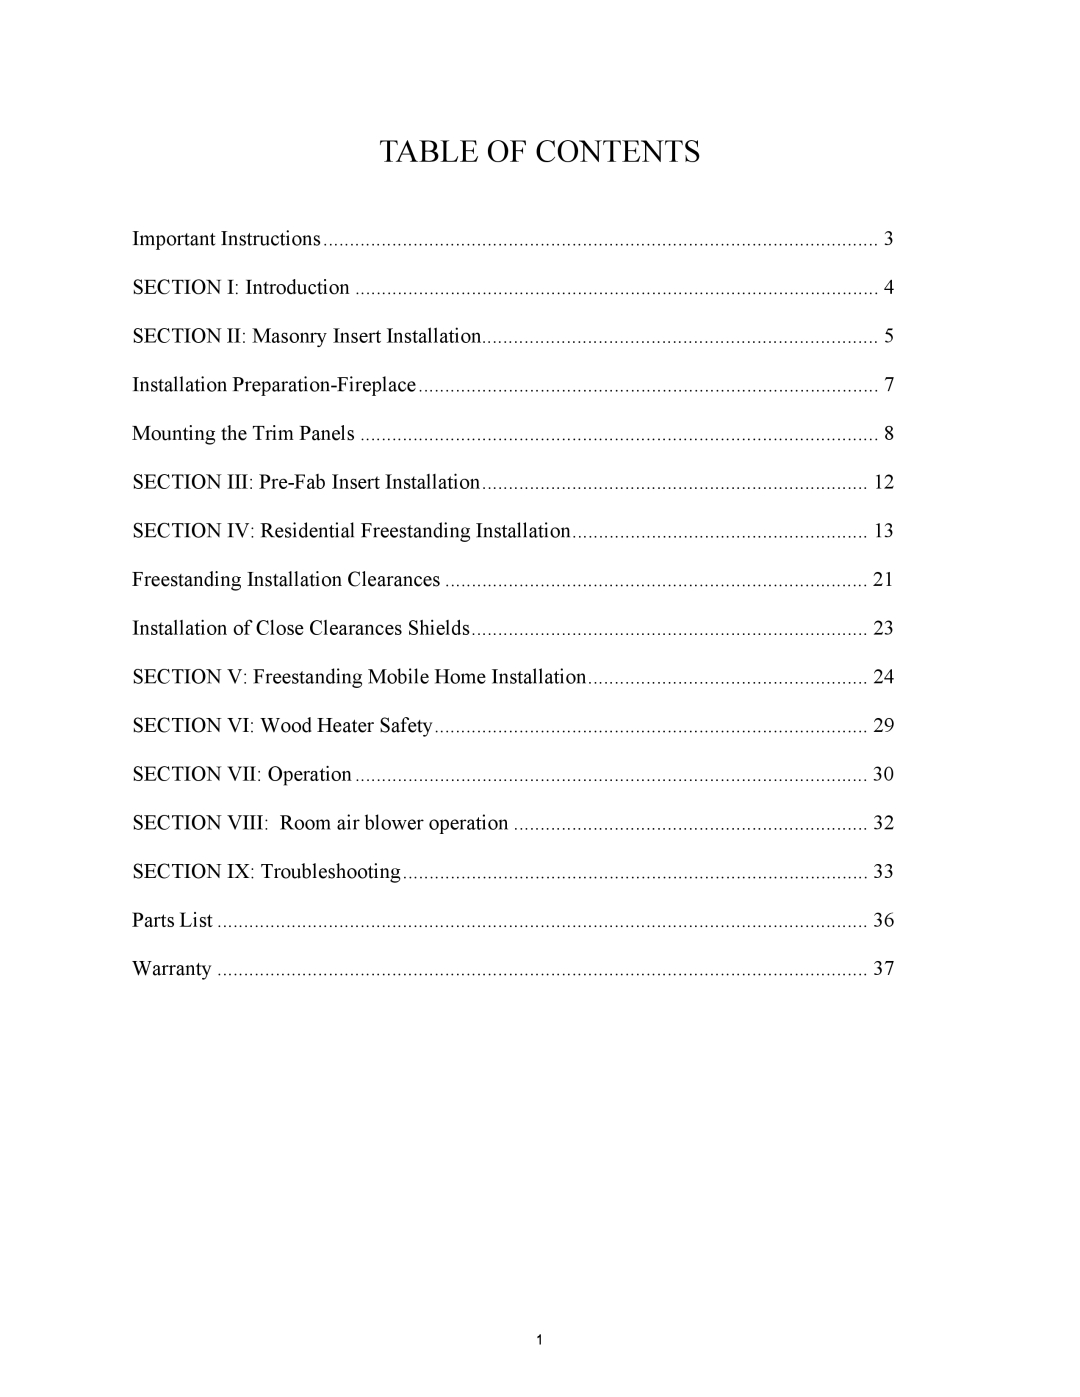 New Buck Corporation 85 installation instructions Table Of Contents 